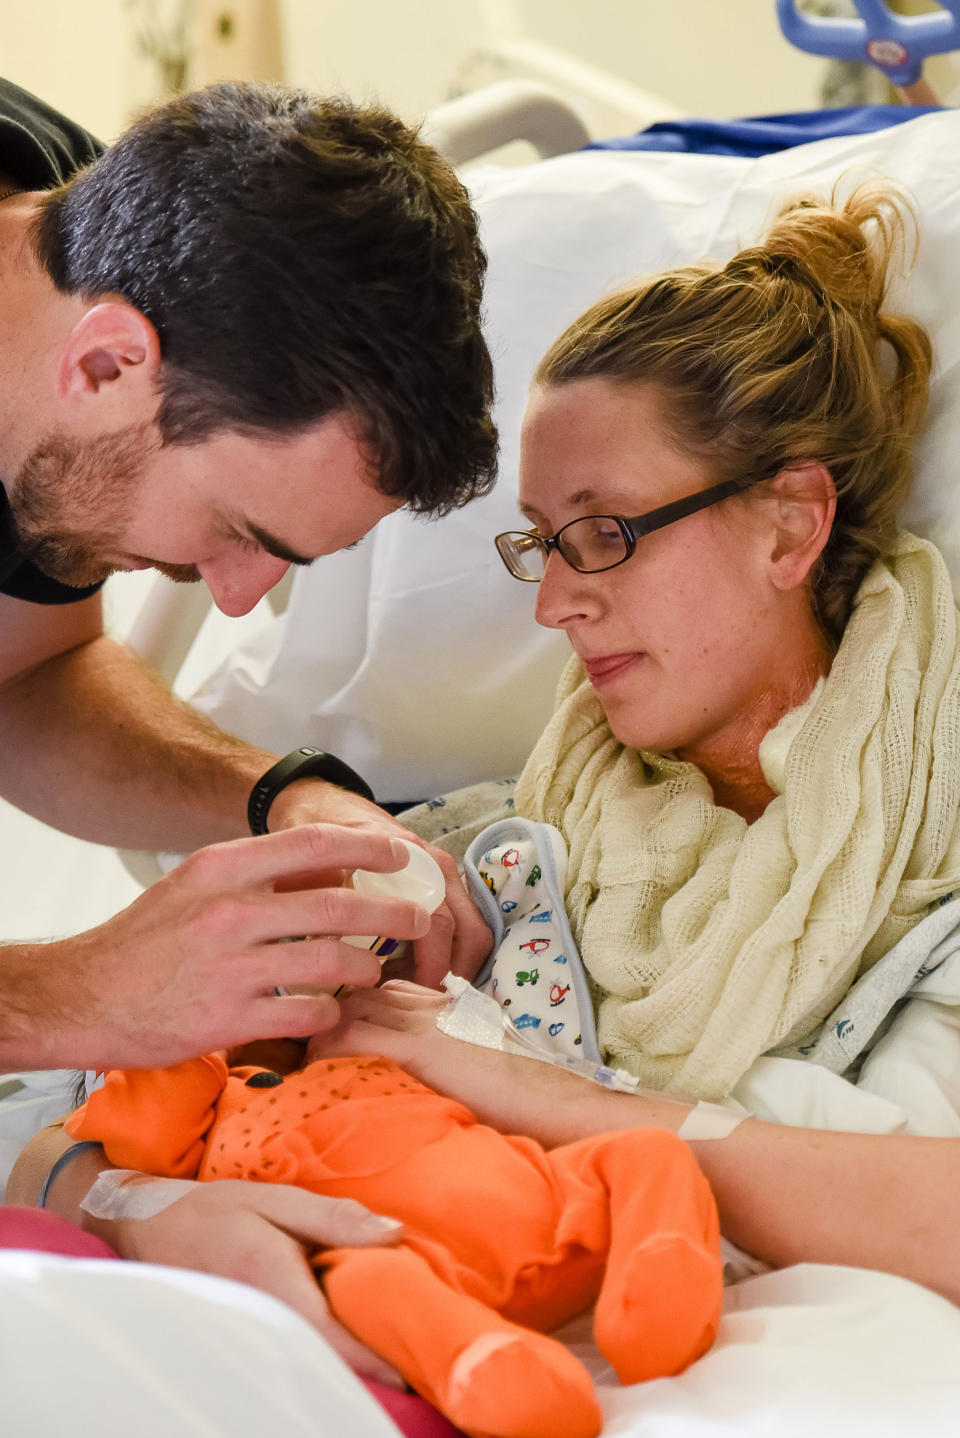 For two weeks, Jessica Grib was on life support after experiencing peripartum cardiomyopathy and couldn't meet her newborn baby. They took pictures when they did meet, which she both 